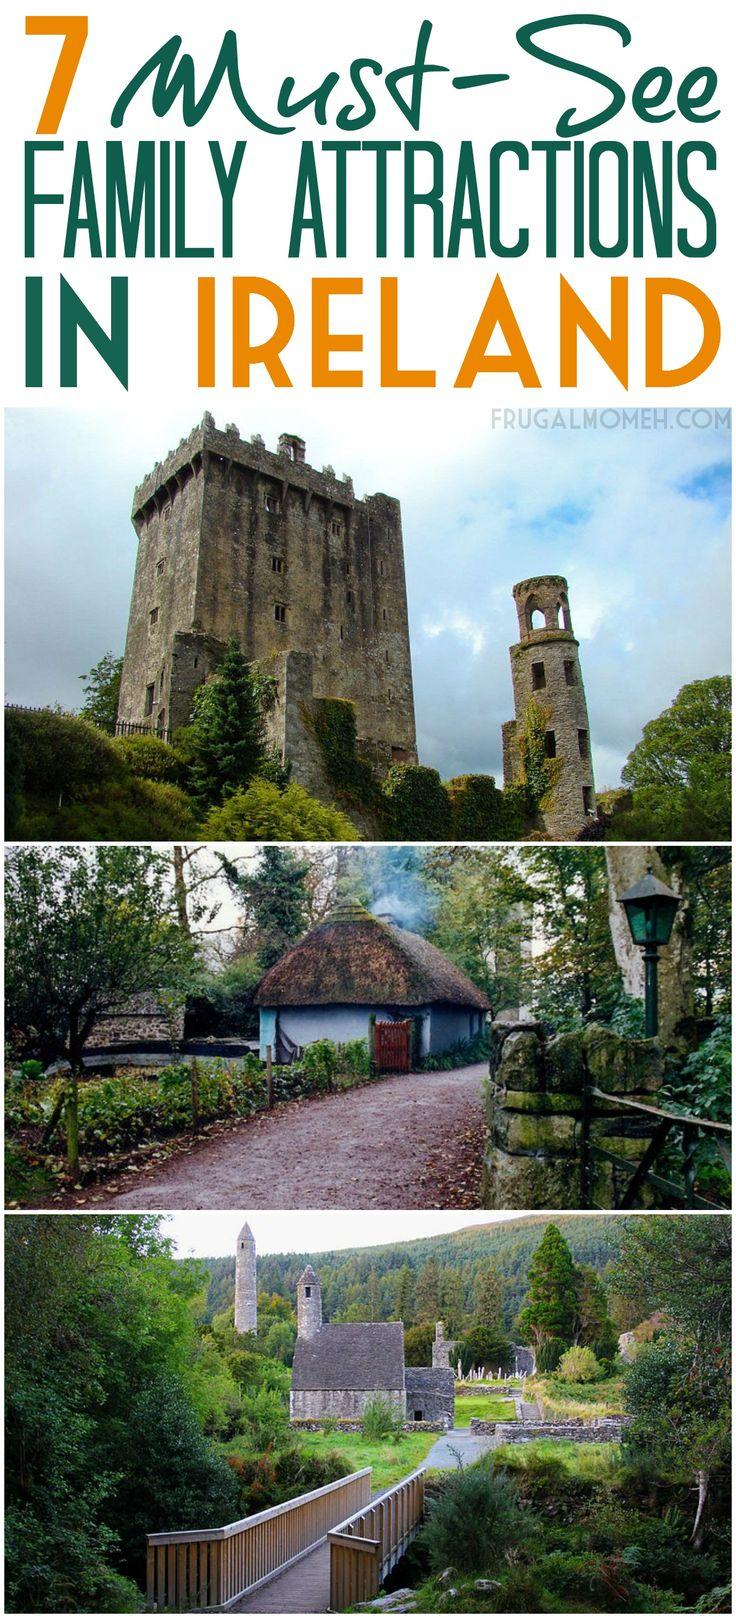 Hochzeit - 7 Must-See Family Attractions In Ireland - Frugal Mom Eh!